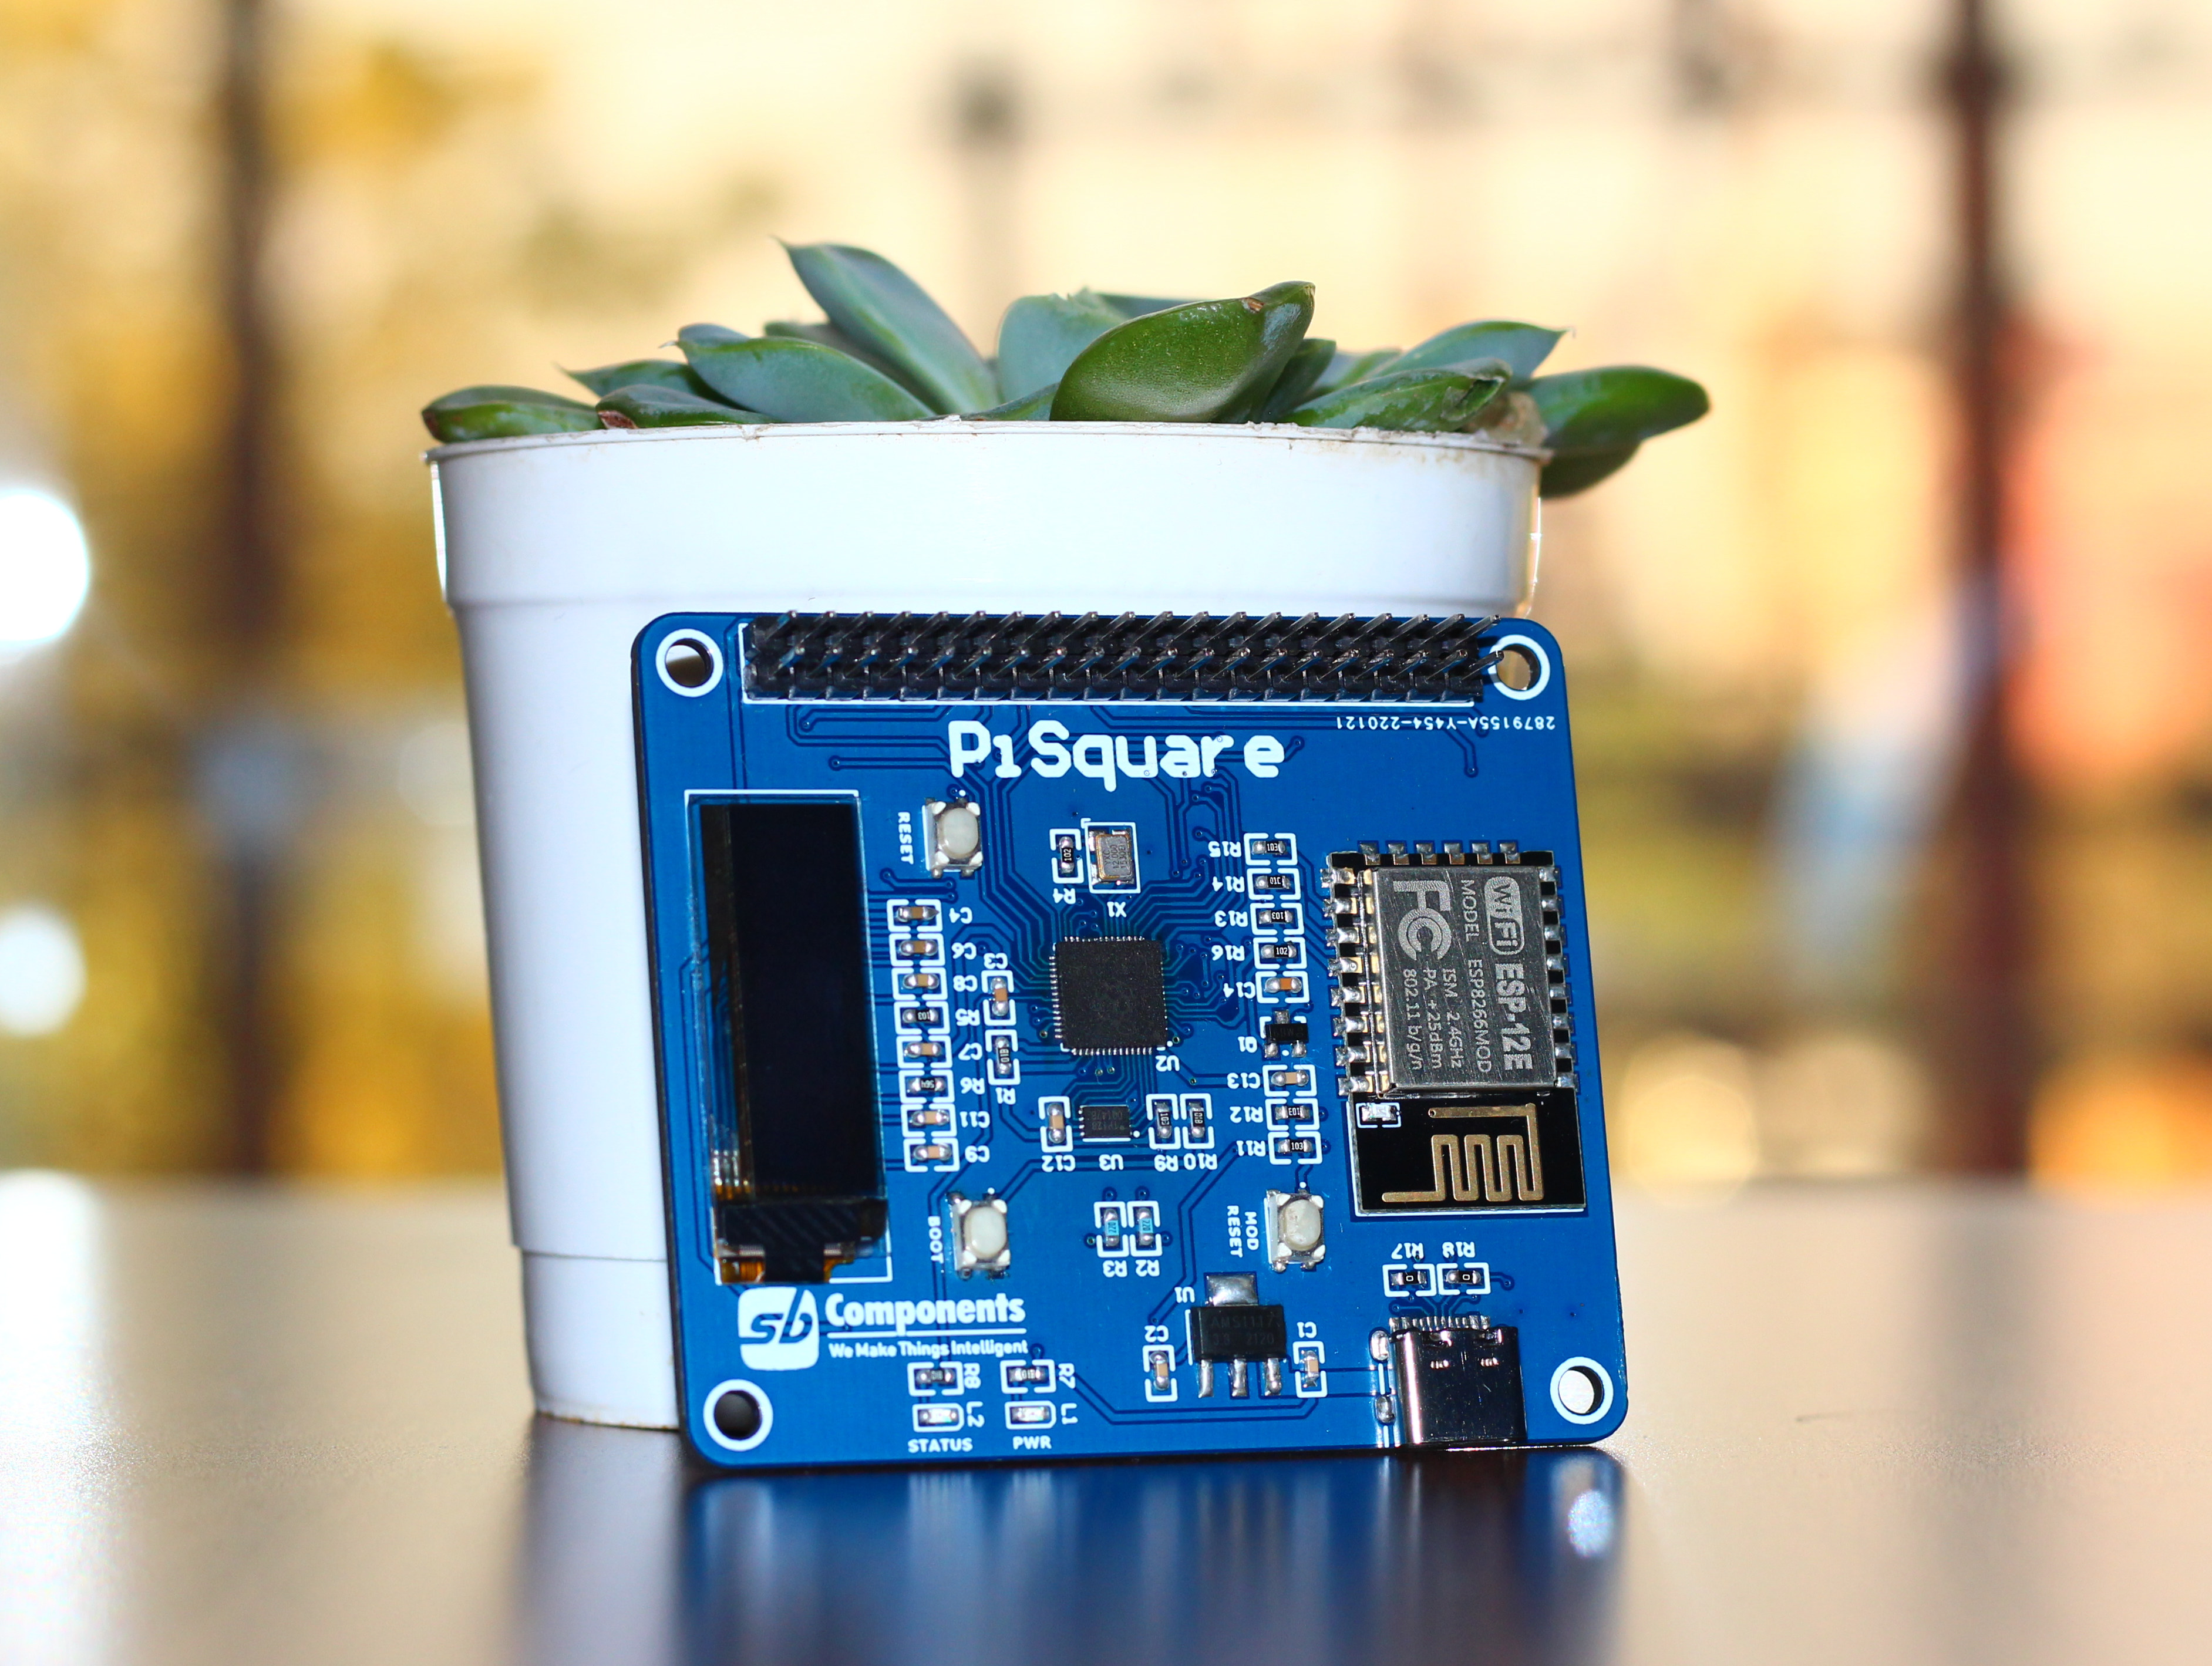 PiSquare enables wireless Raspberry Pi HAT control though ESP8266 and RP2040 MCUs (Crowdfunding)